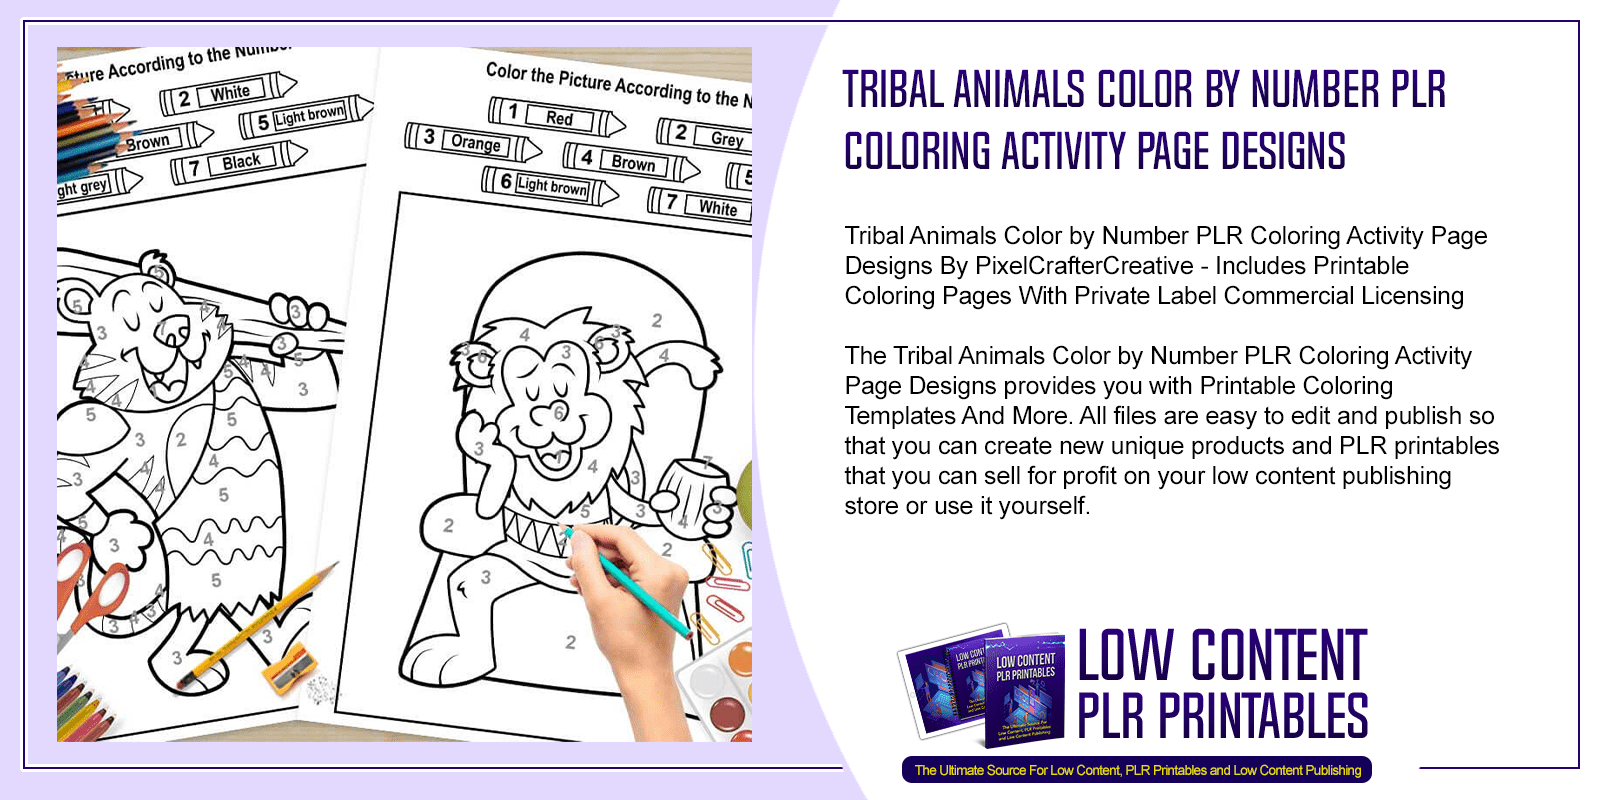 Tribal Animals Color by Number PLR Coloring Activity Page Designs